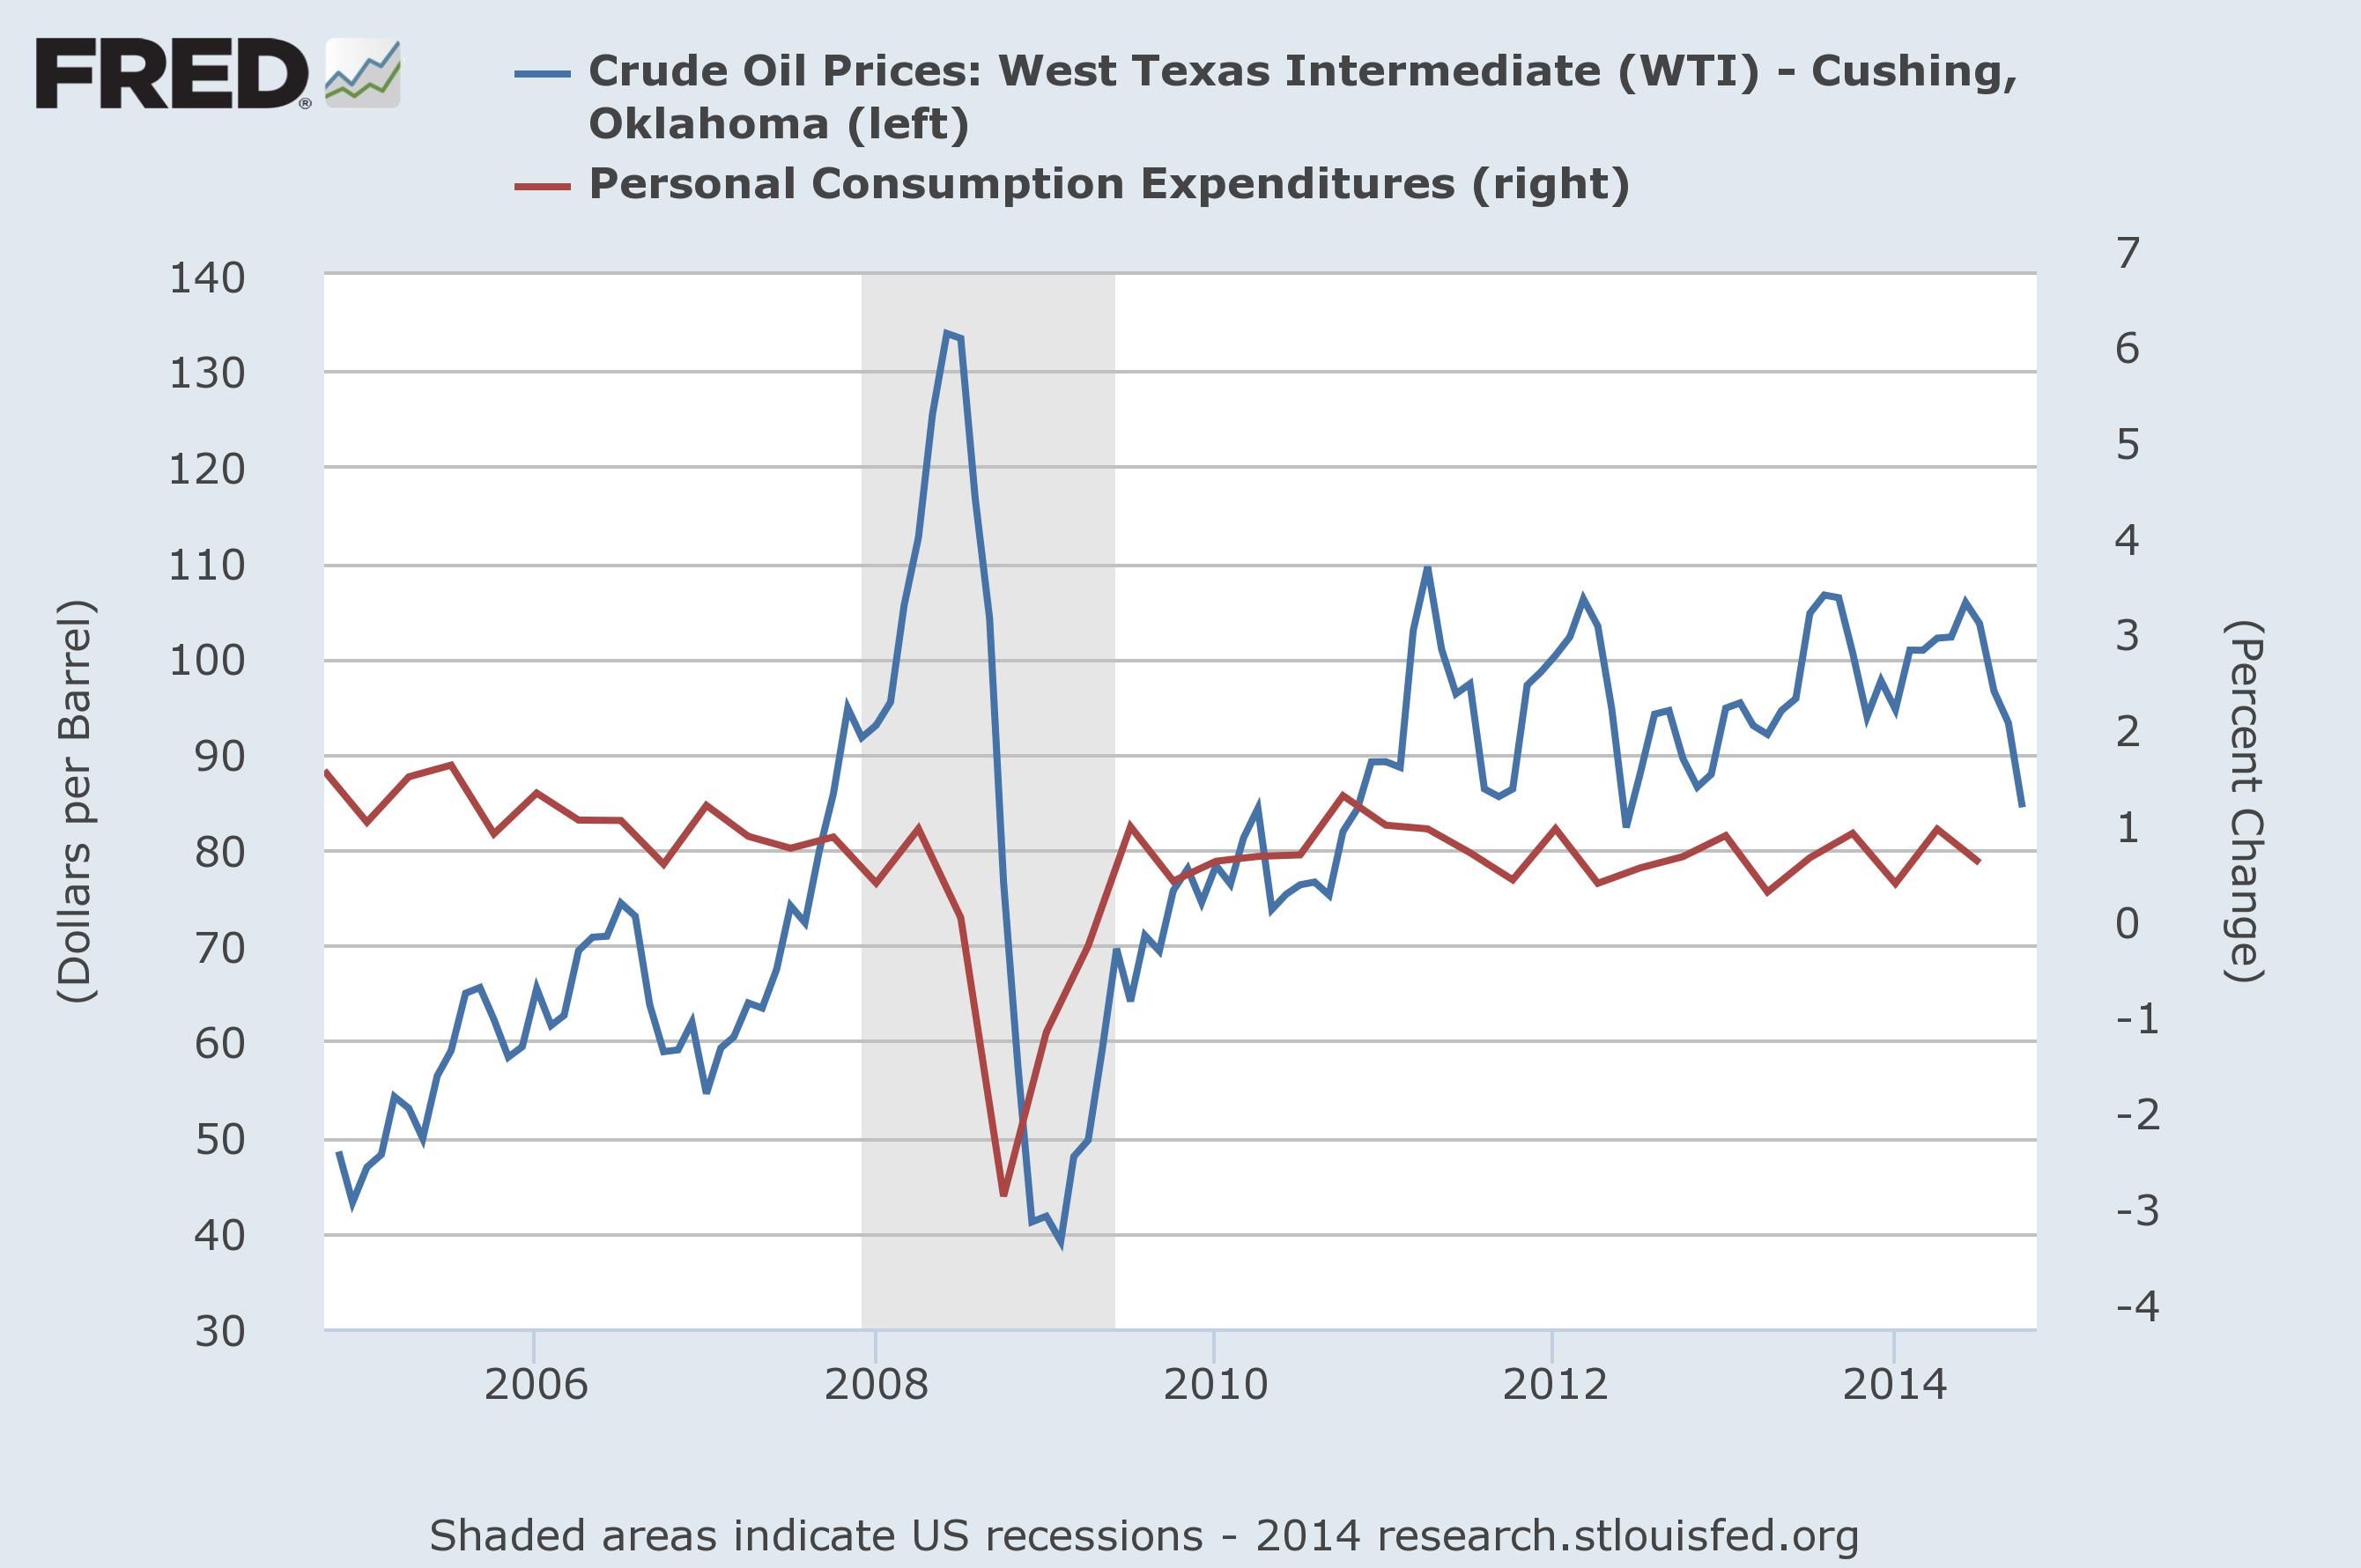 Crude Prices v. Consumer Expenditures